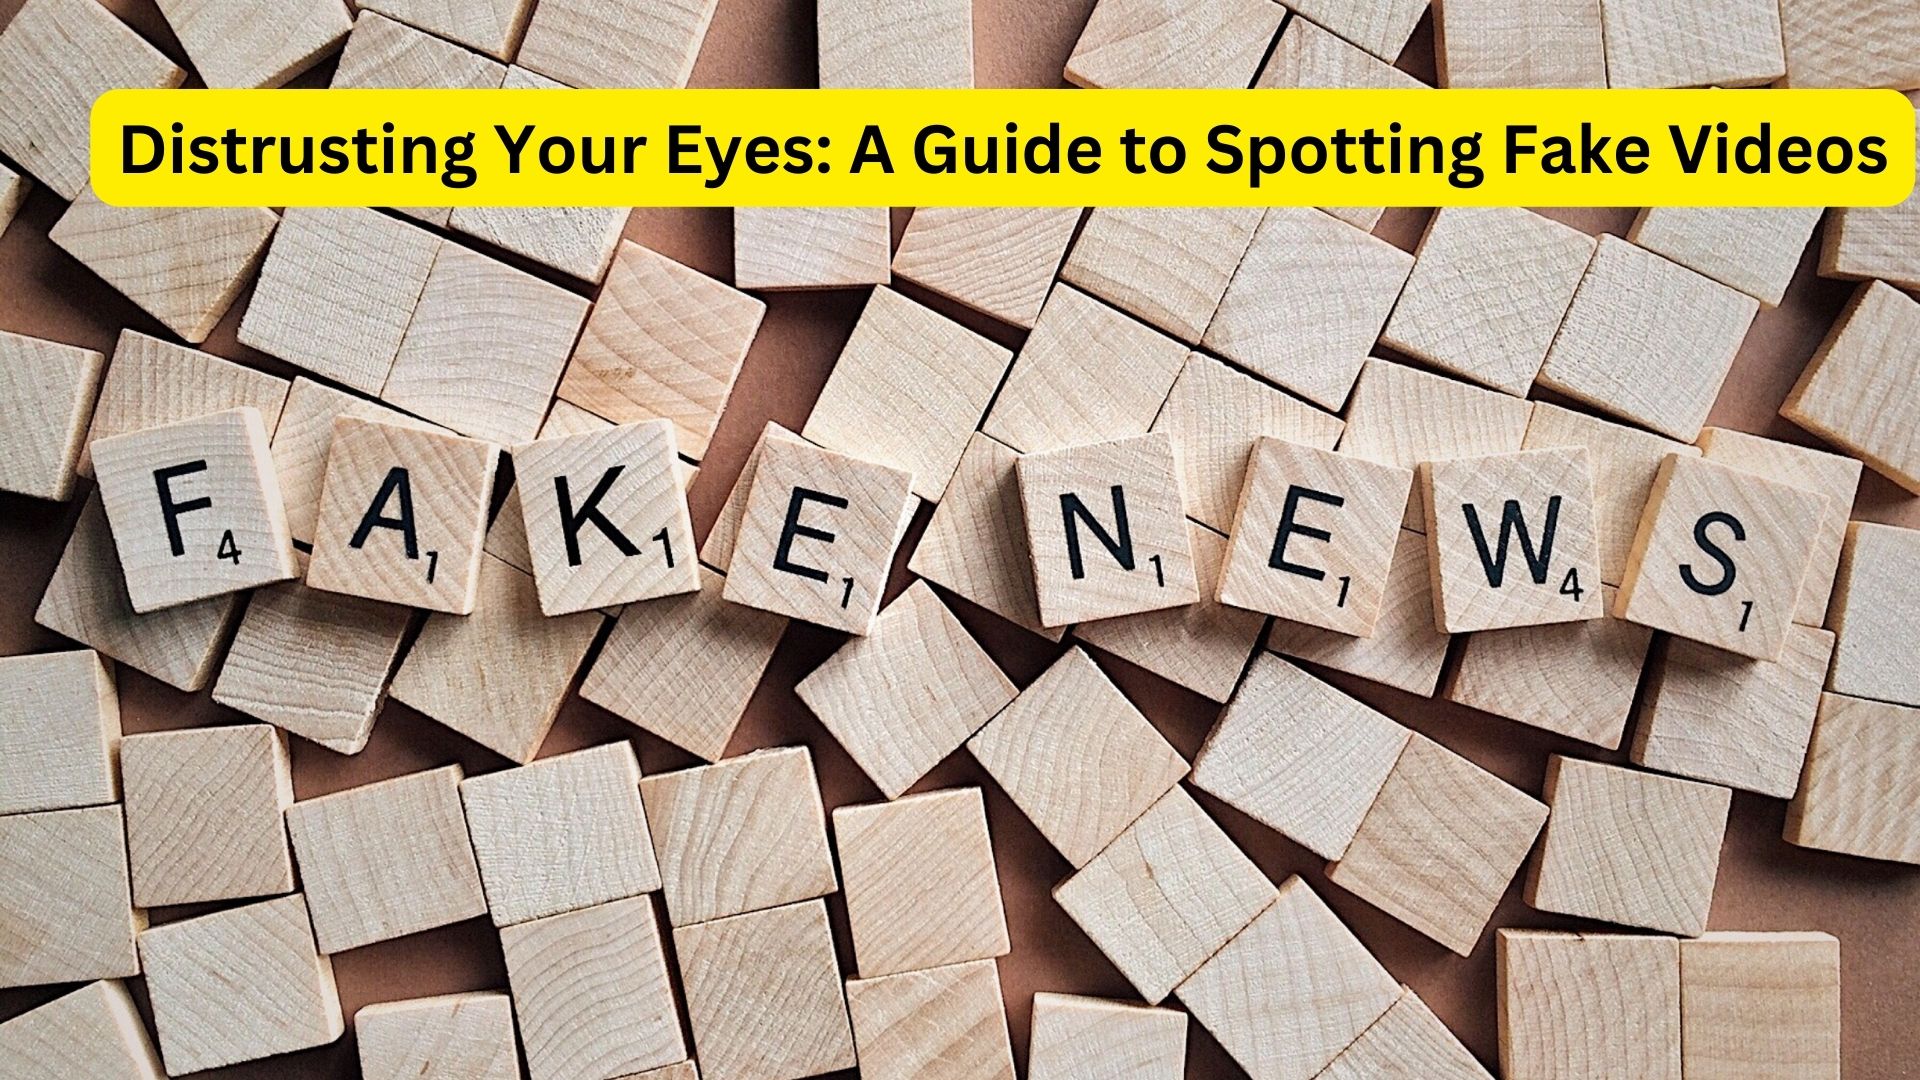 Distrusting Your Eyes: A Guide to Spotting Fake Videos